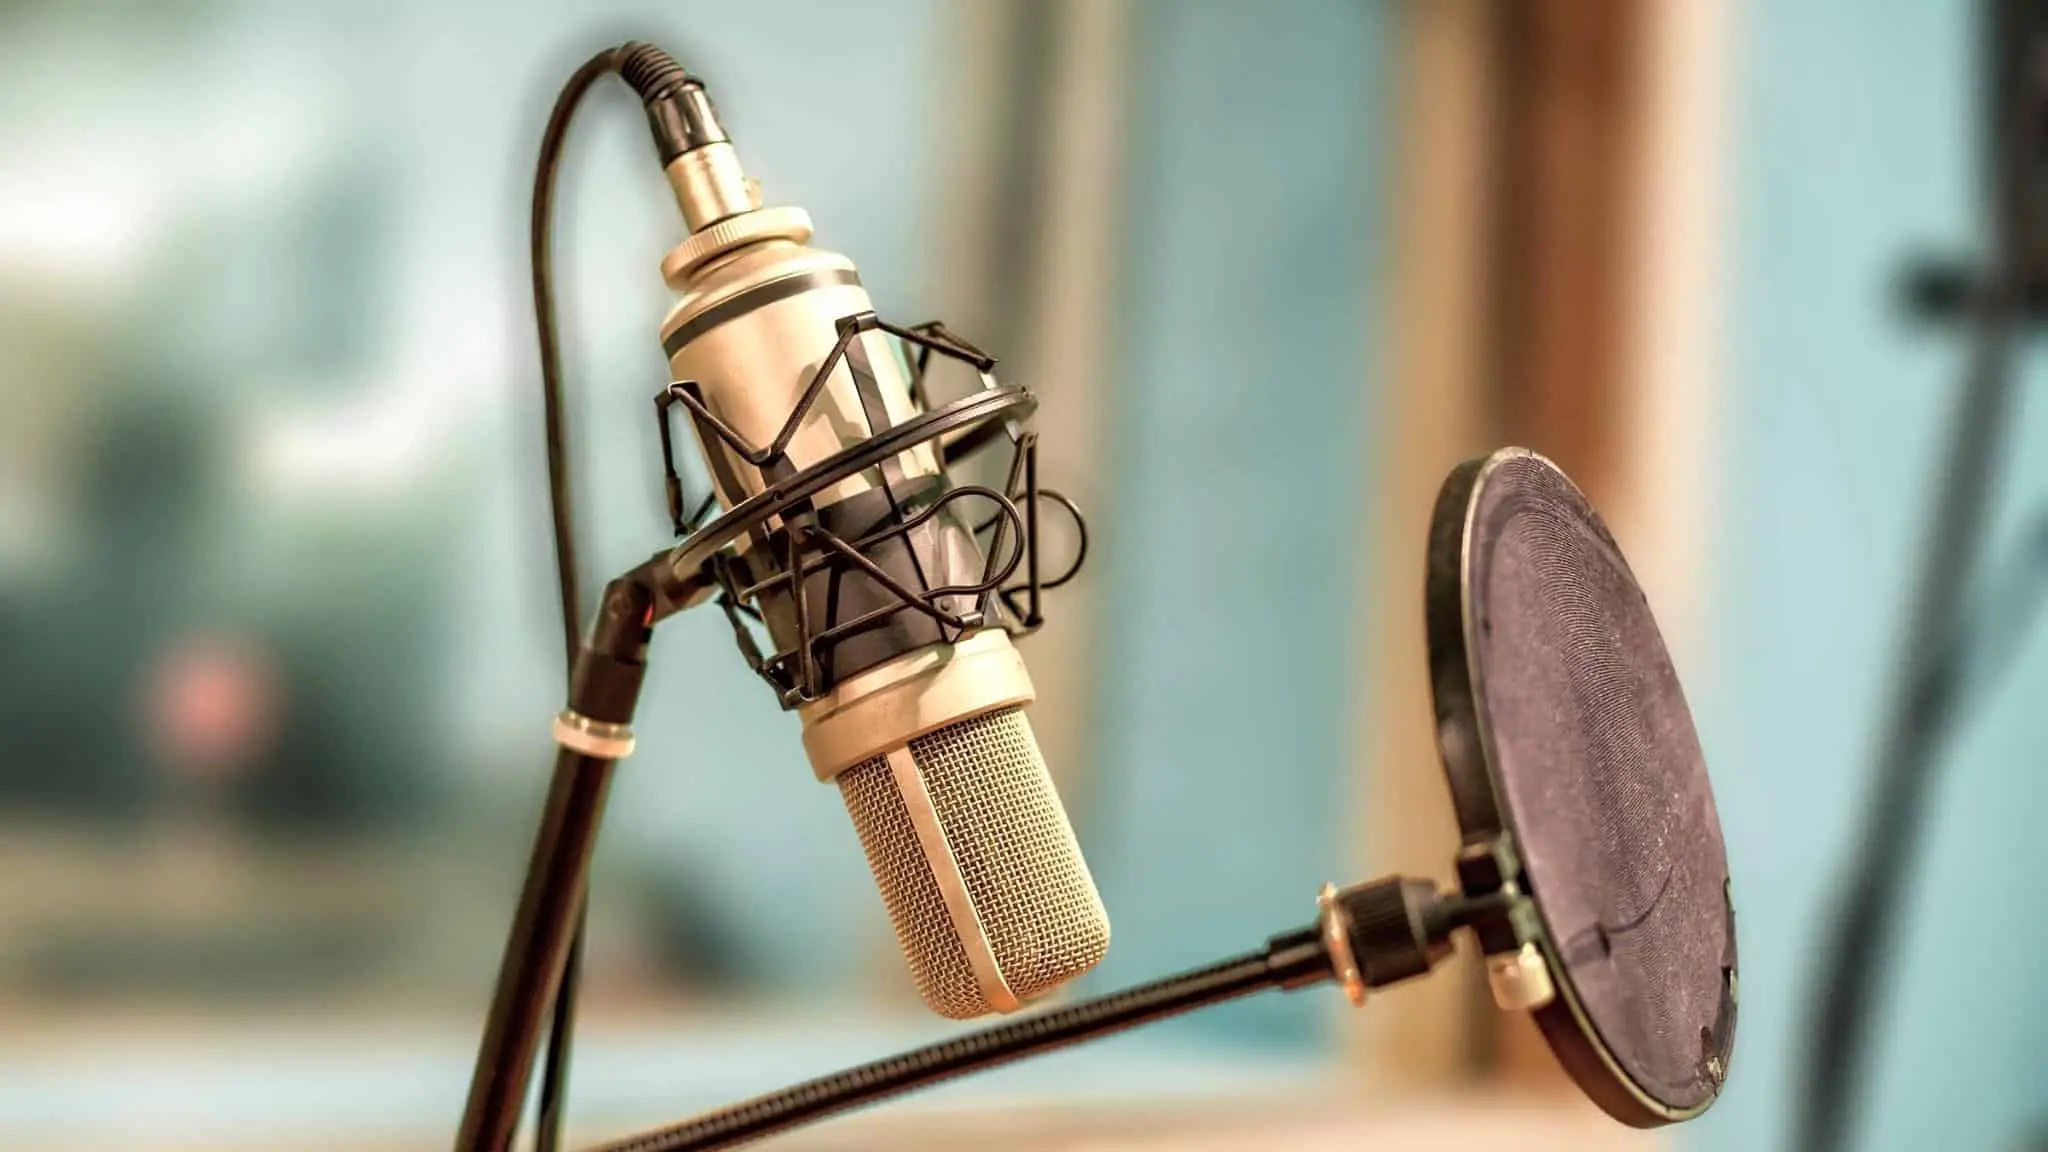 Popfilter in front of microphone